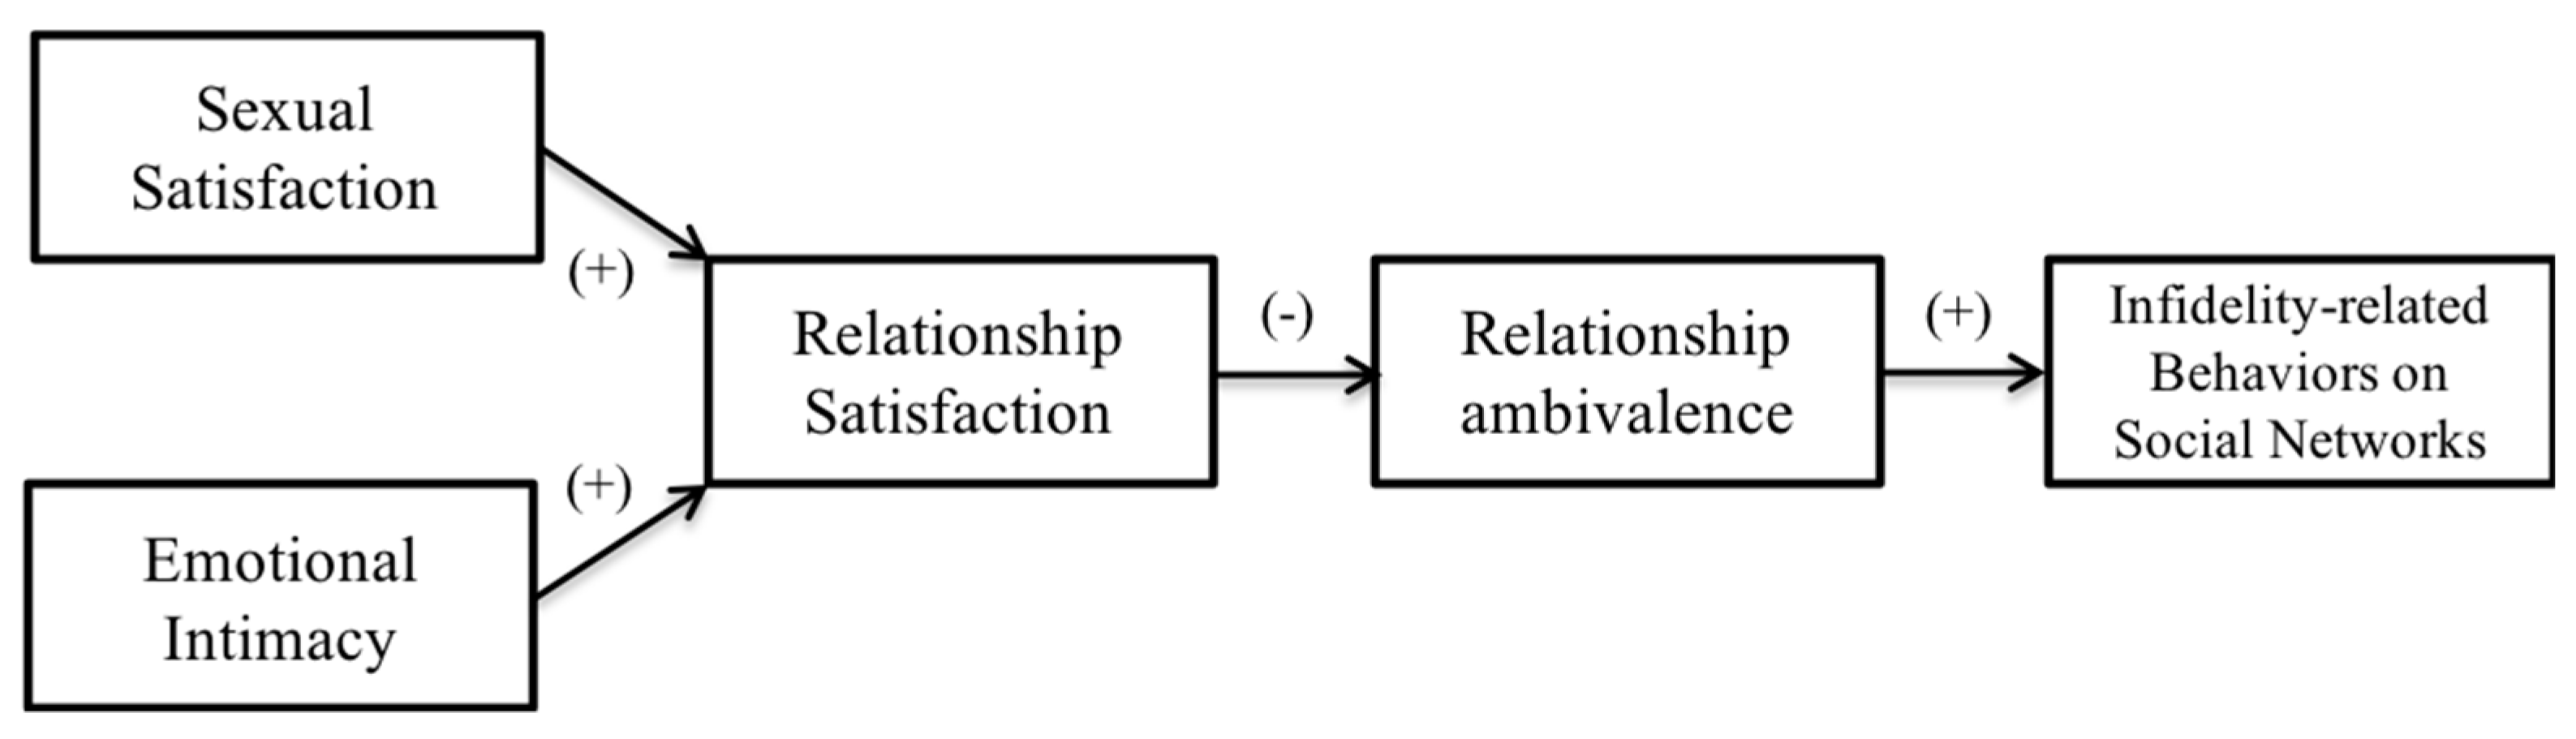 EJIHPE Free Full-Text Relationship Satisfaction and Infidelity-Related Behaviors on Social Networks A Preliminary Online Study of Hispanic Women picture